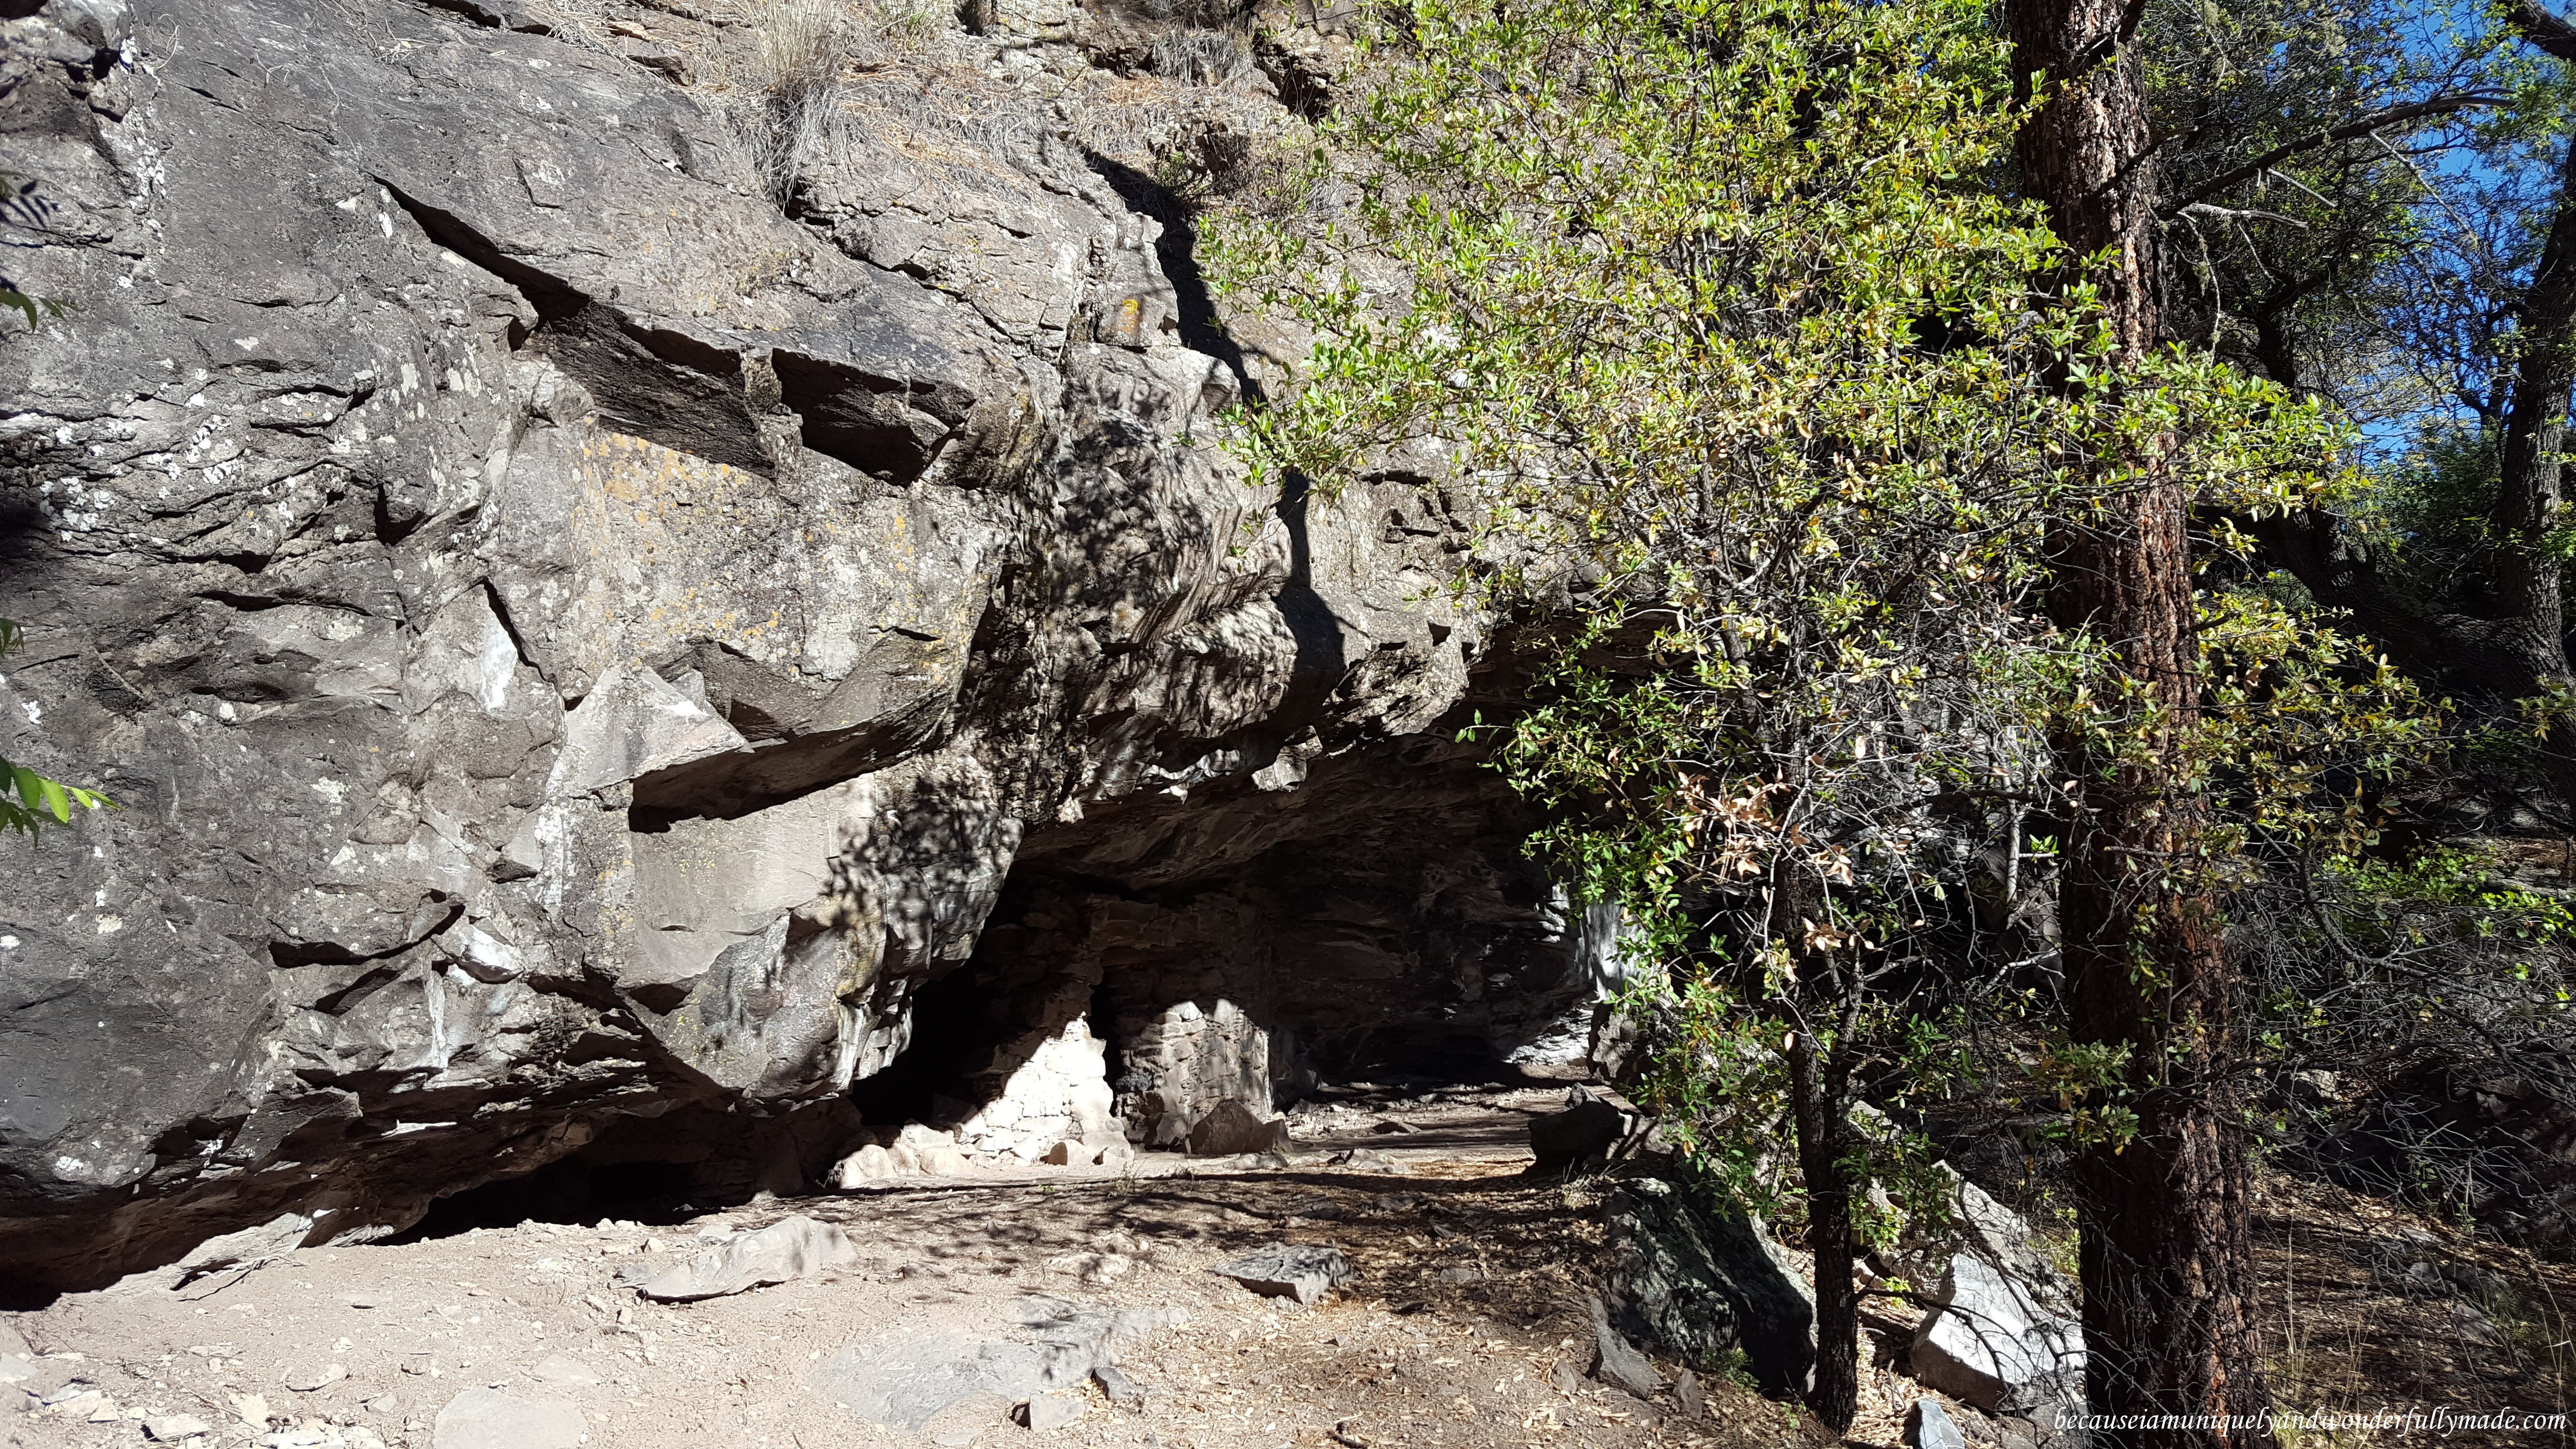 The other branch of the Trail to the Past at Gila National Forest leads to this small cave dwelling. It is located near Lower Scorpion campground.